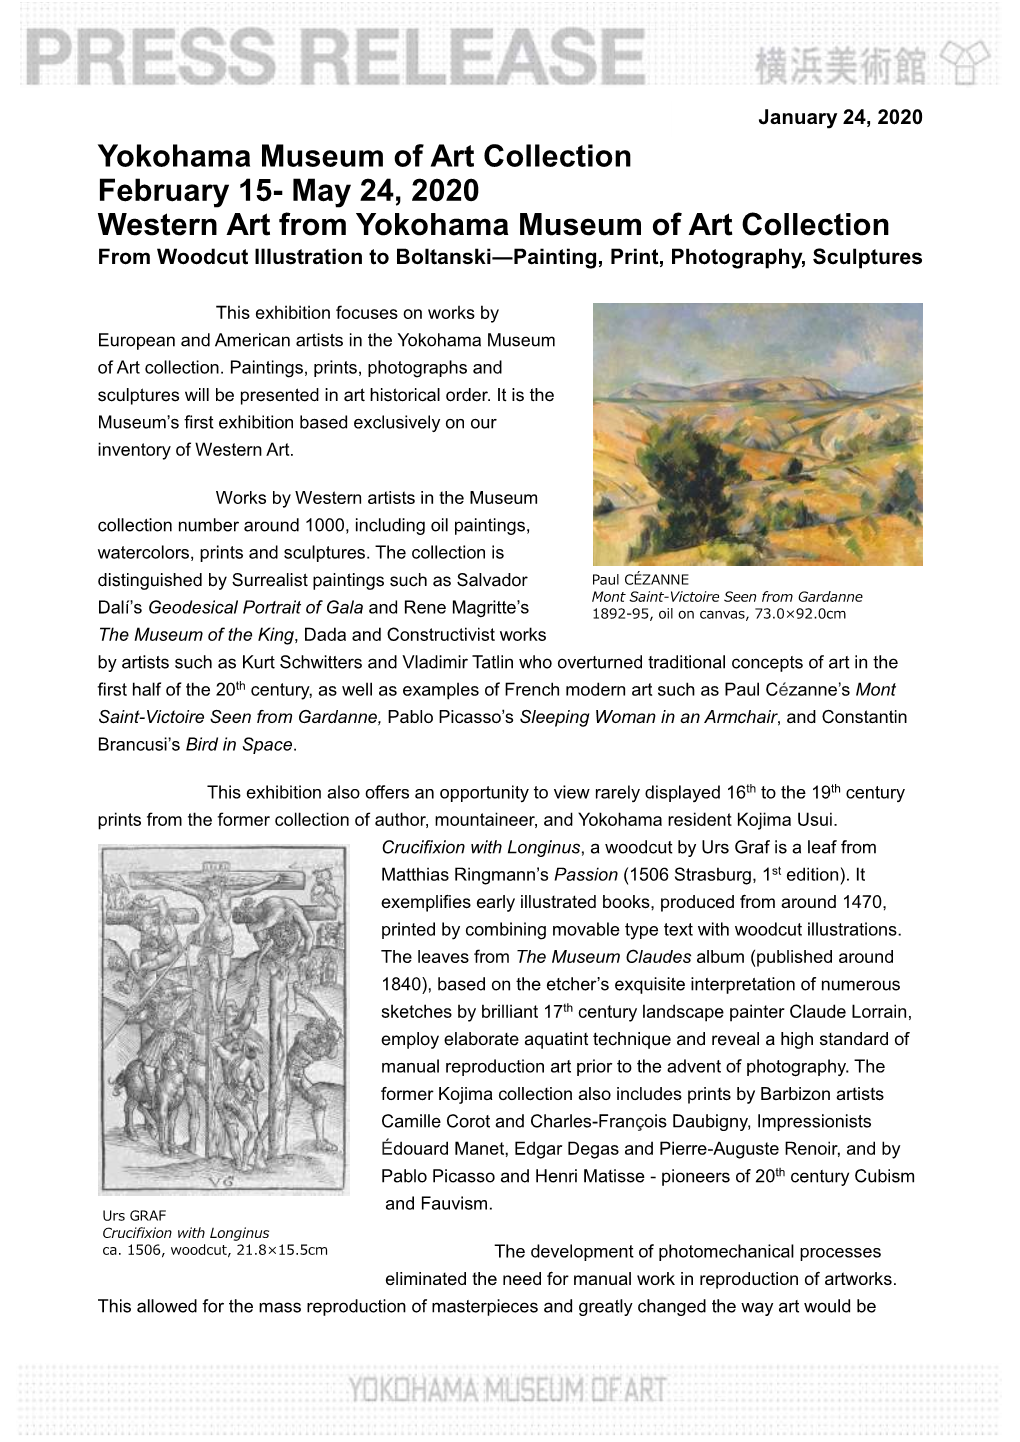 May 24, 2020 Western Art from Yokohama Museum of Art Collection from Woodcut Illustration to Boltanski―Painting, Print, Photography, Sculptures